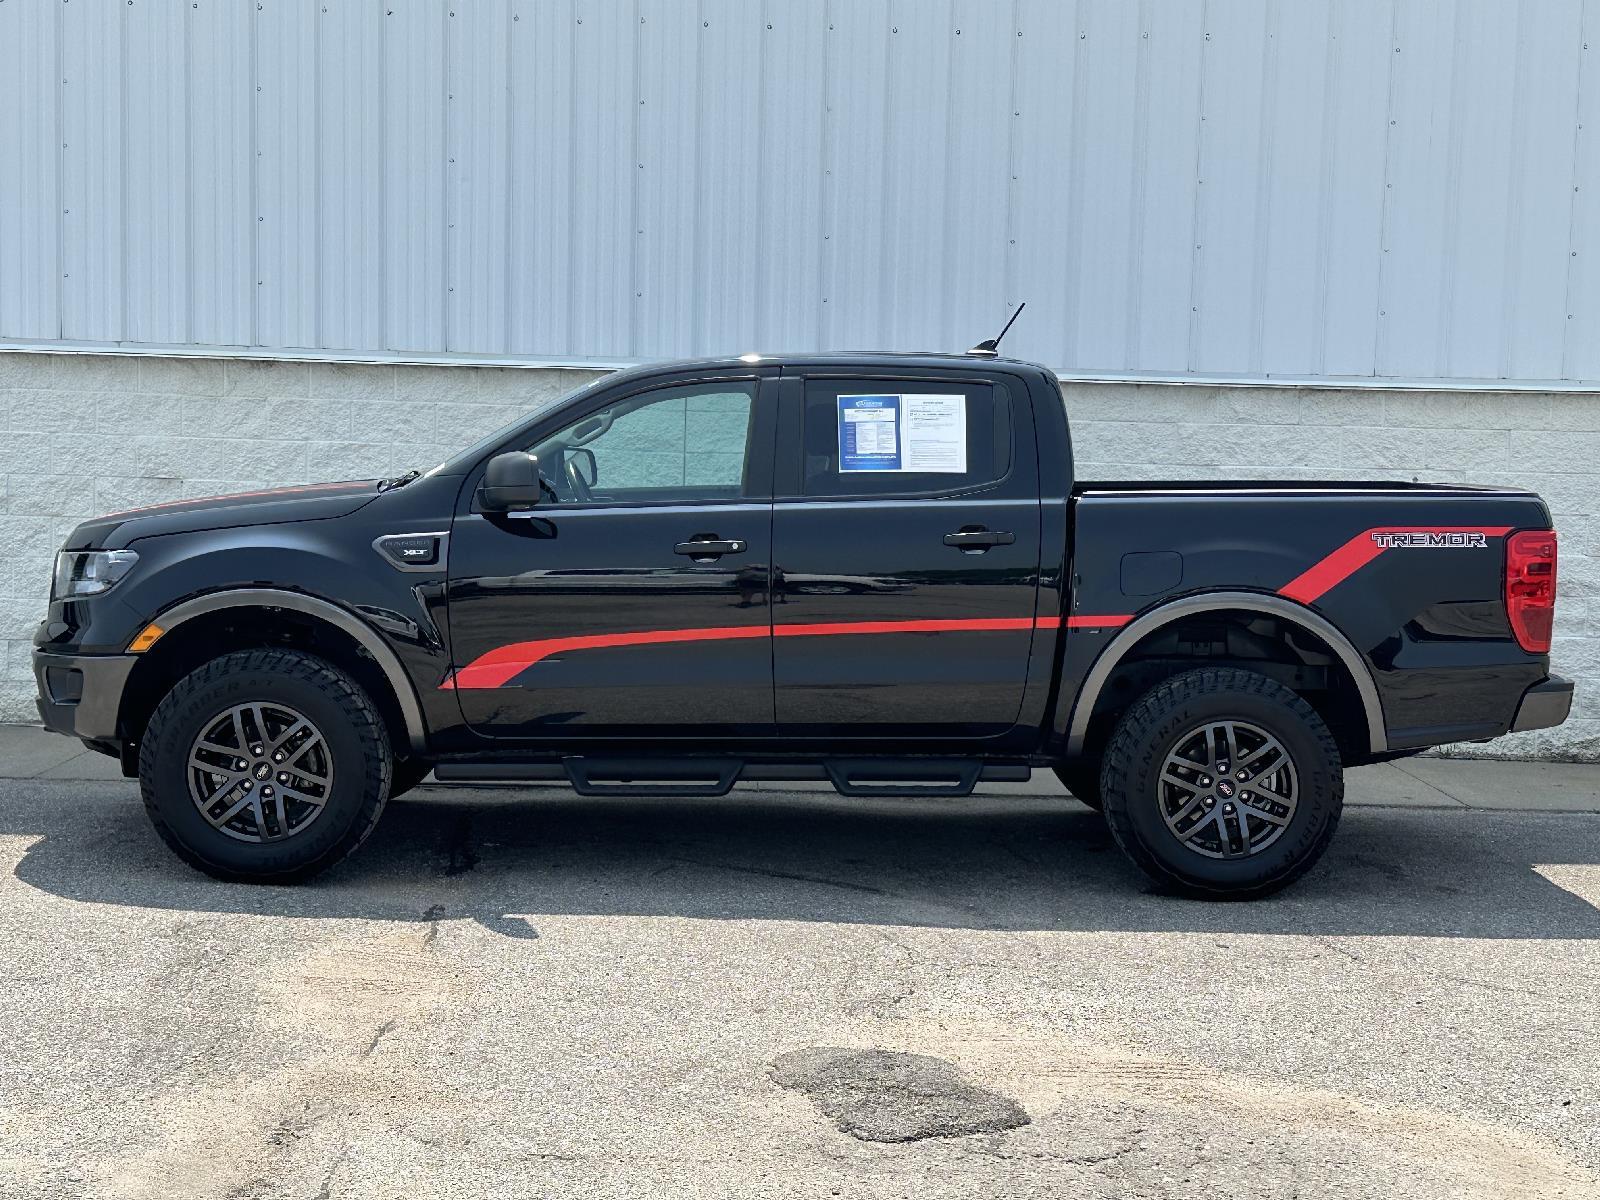 Used 2021 Ford Ranger XLT Crew Cab Truck for sale in Lincoln NE